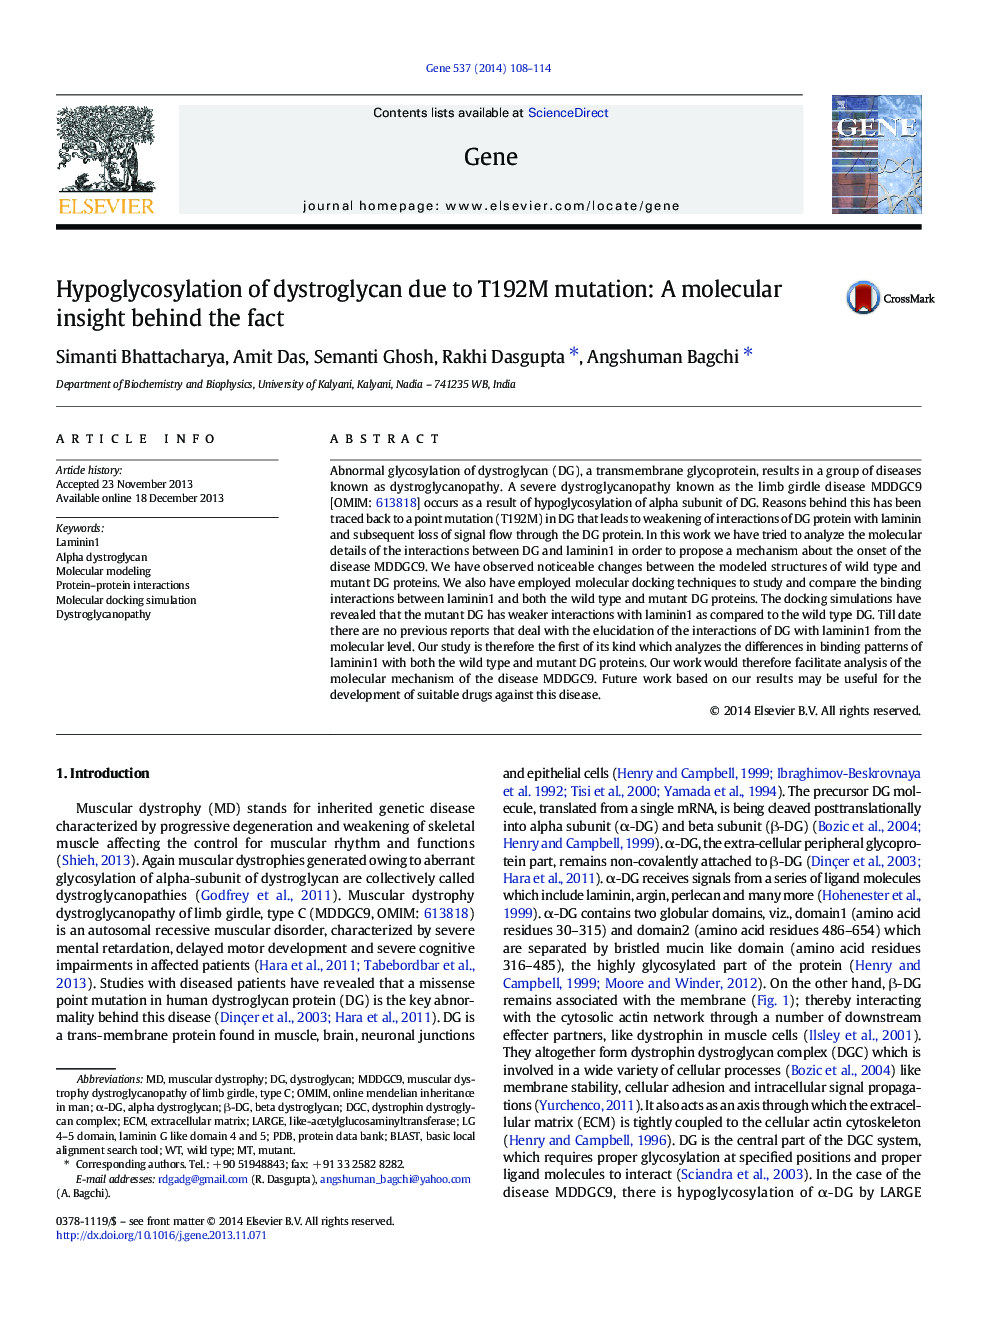 Hypoglycosylation of dystroglycan due to T192M mutation: A molecular insight behind the fact